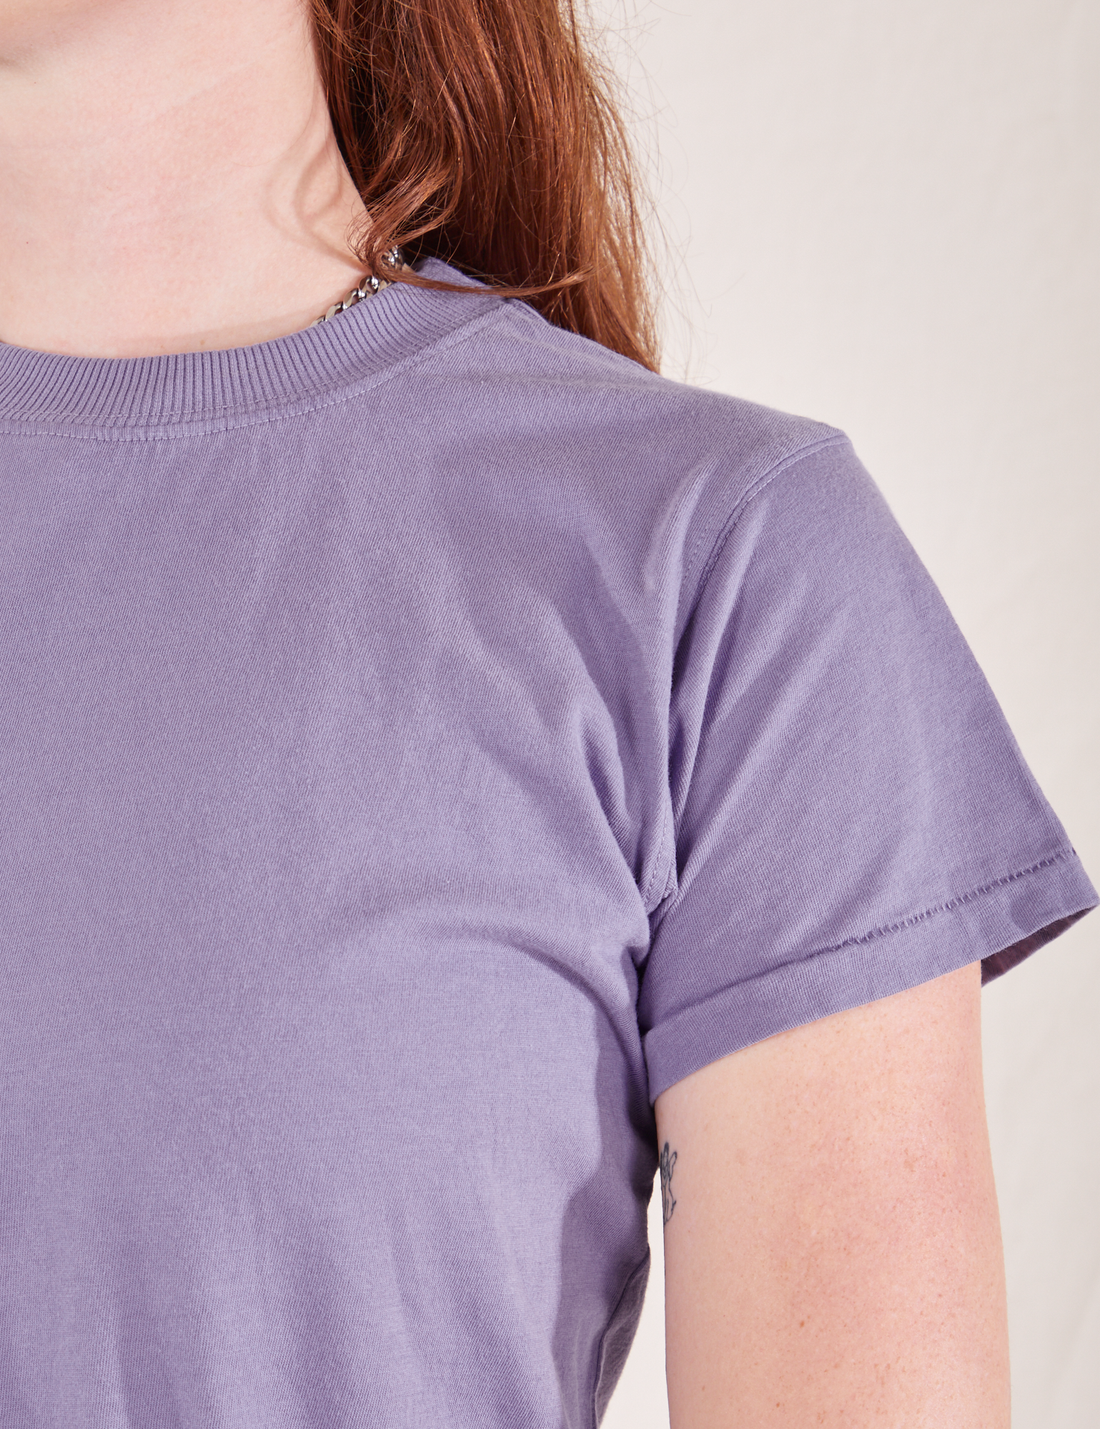 The Organic Vintage Tee in Faded Grape sleeve close up on Alex